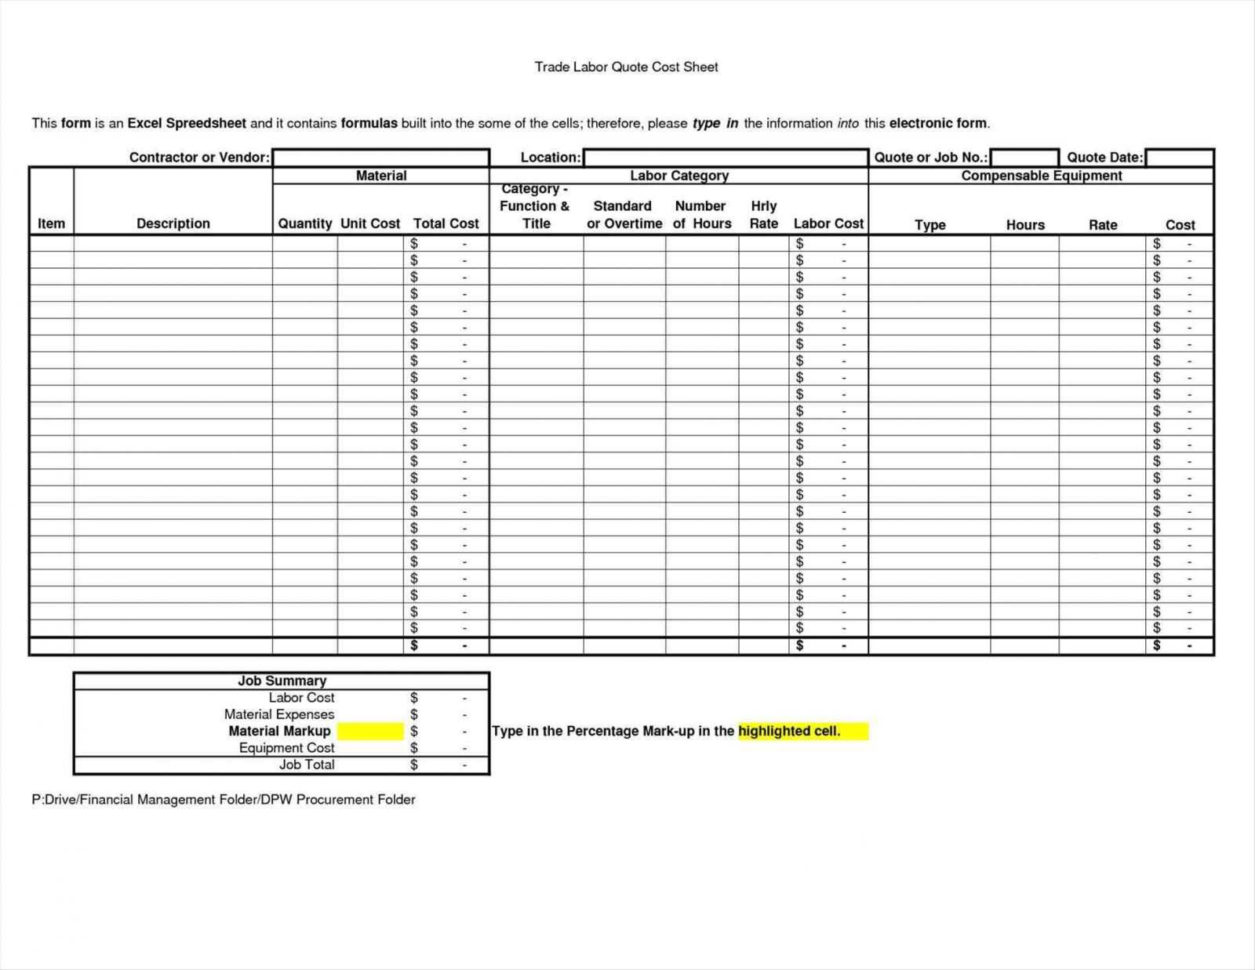 expense-accrual-spreadsheet-template-for-15-new-track-my-expenses-spreadsheet-twables-site-with